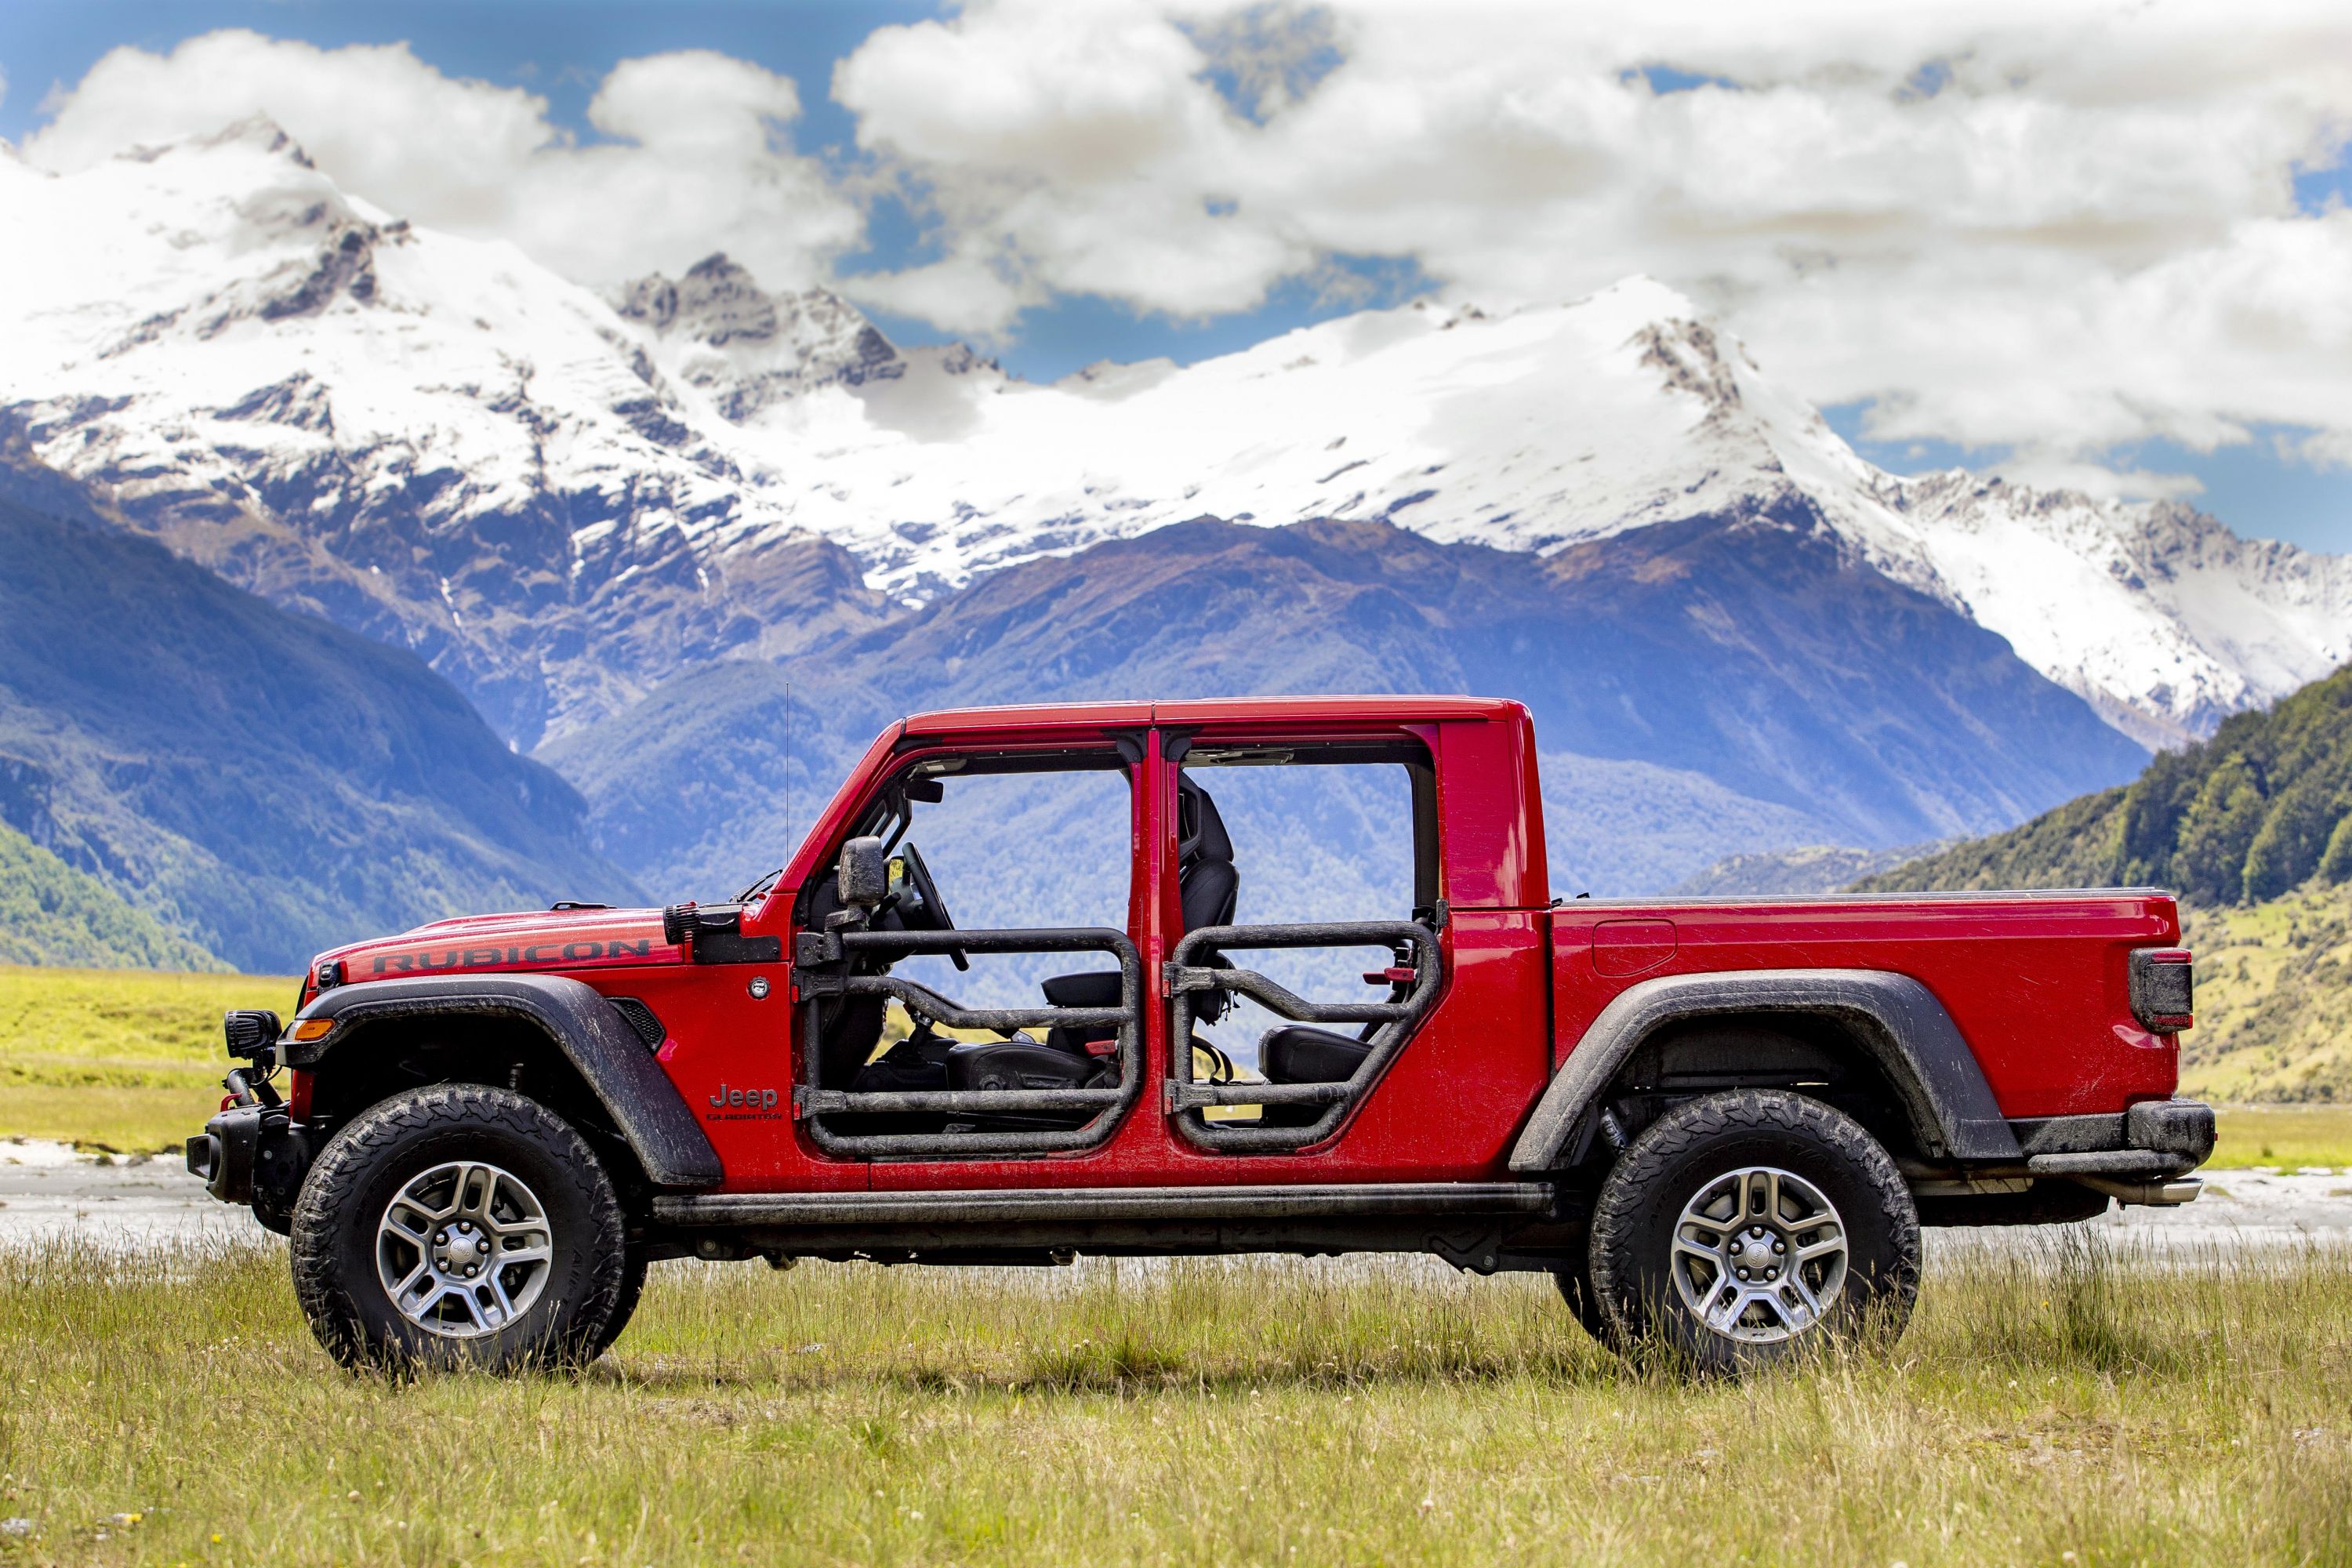 2020 Jeep Gladiator pricing and specs | CarExpert